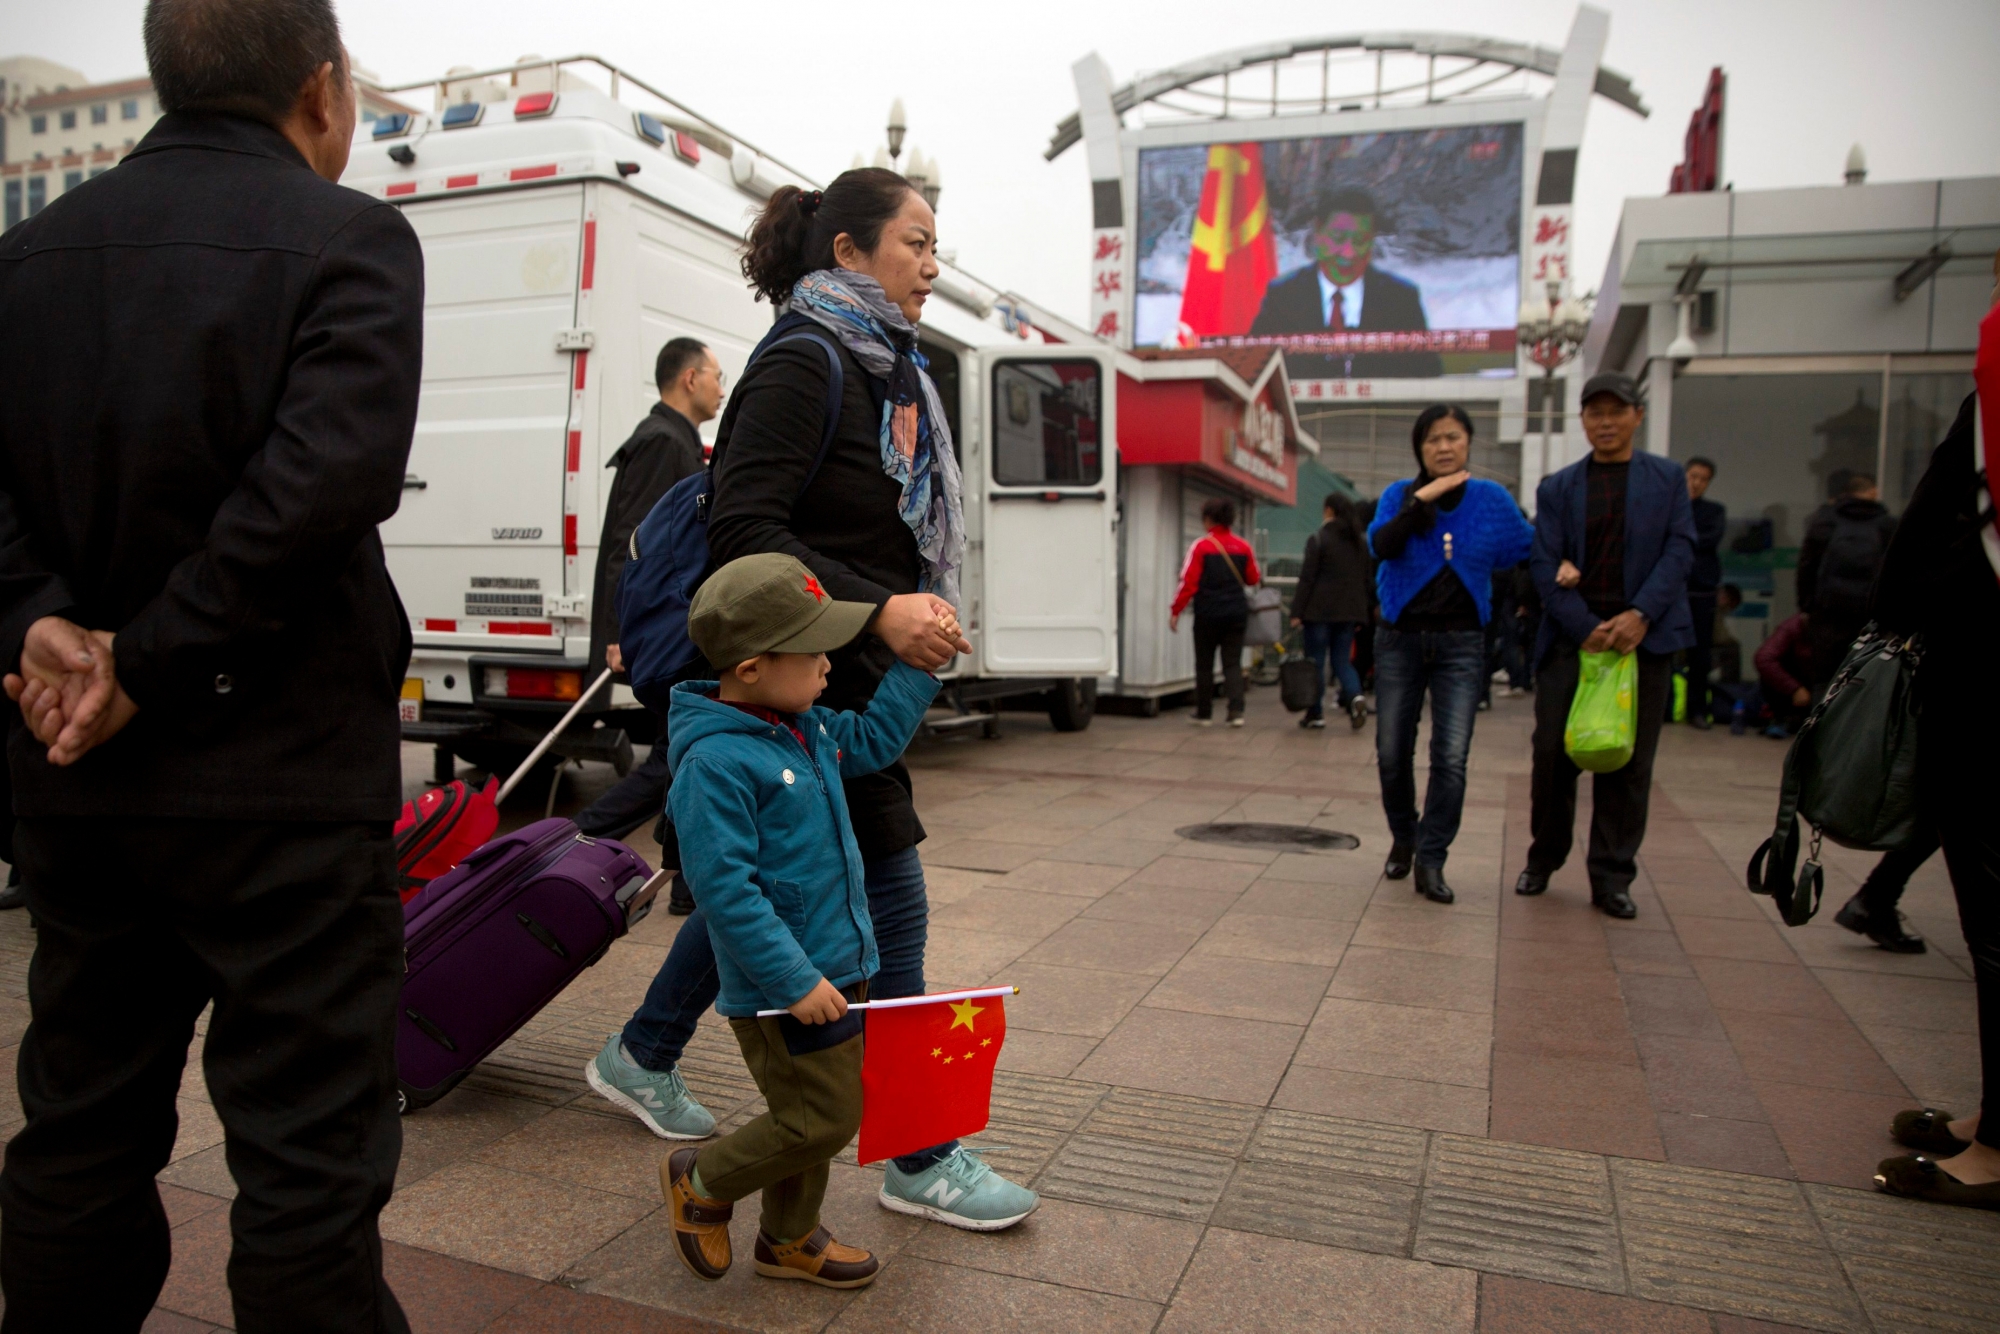 A woman and a boy carrying a Chinese flag walk past a television screen outside of the Beijing Railway Station showing a live broadcast of Chinese President Xi Jinping introducing members of the Politburo Standing Committee of China's 19th Party Congress at the Great Hall of the People in Beijing, Wednesday, Oct. 25, 2017. Communist Party leader Xi Jinping on Wednesday unveiled the lineup of the party's highest body who will rule alongside him as he embarks on a second five-year term as party leader. (AP Photo/Mark Schiefelbein) China Party Congress